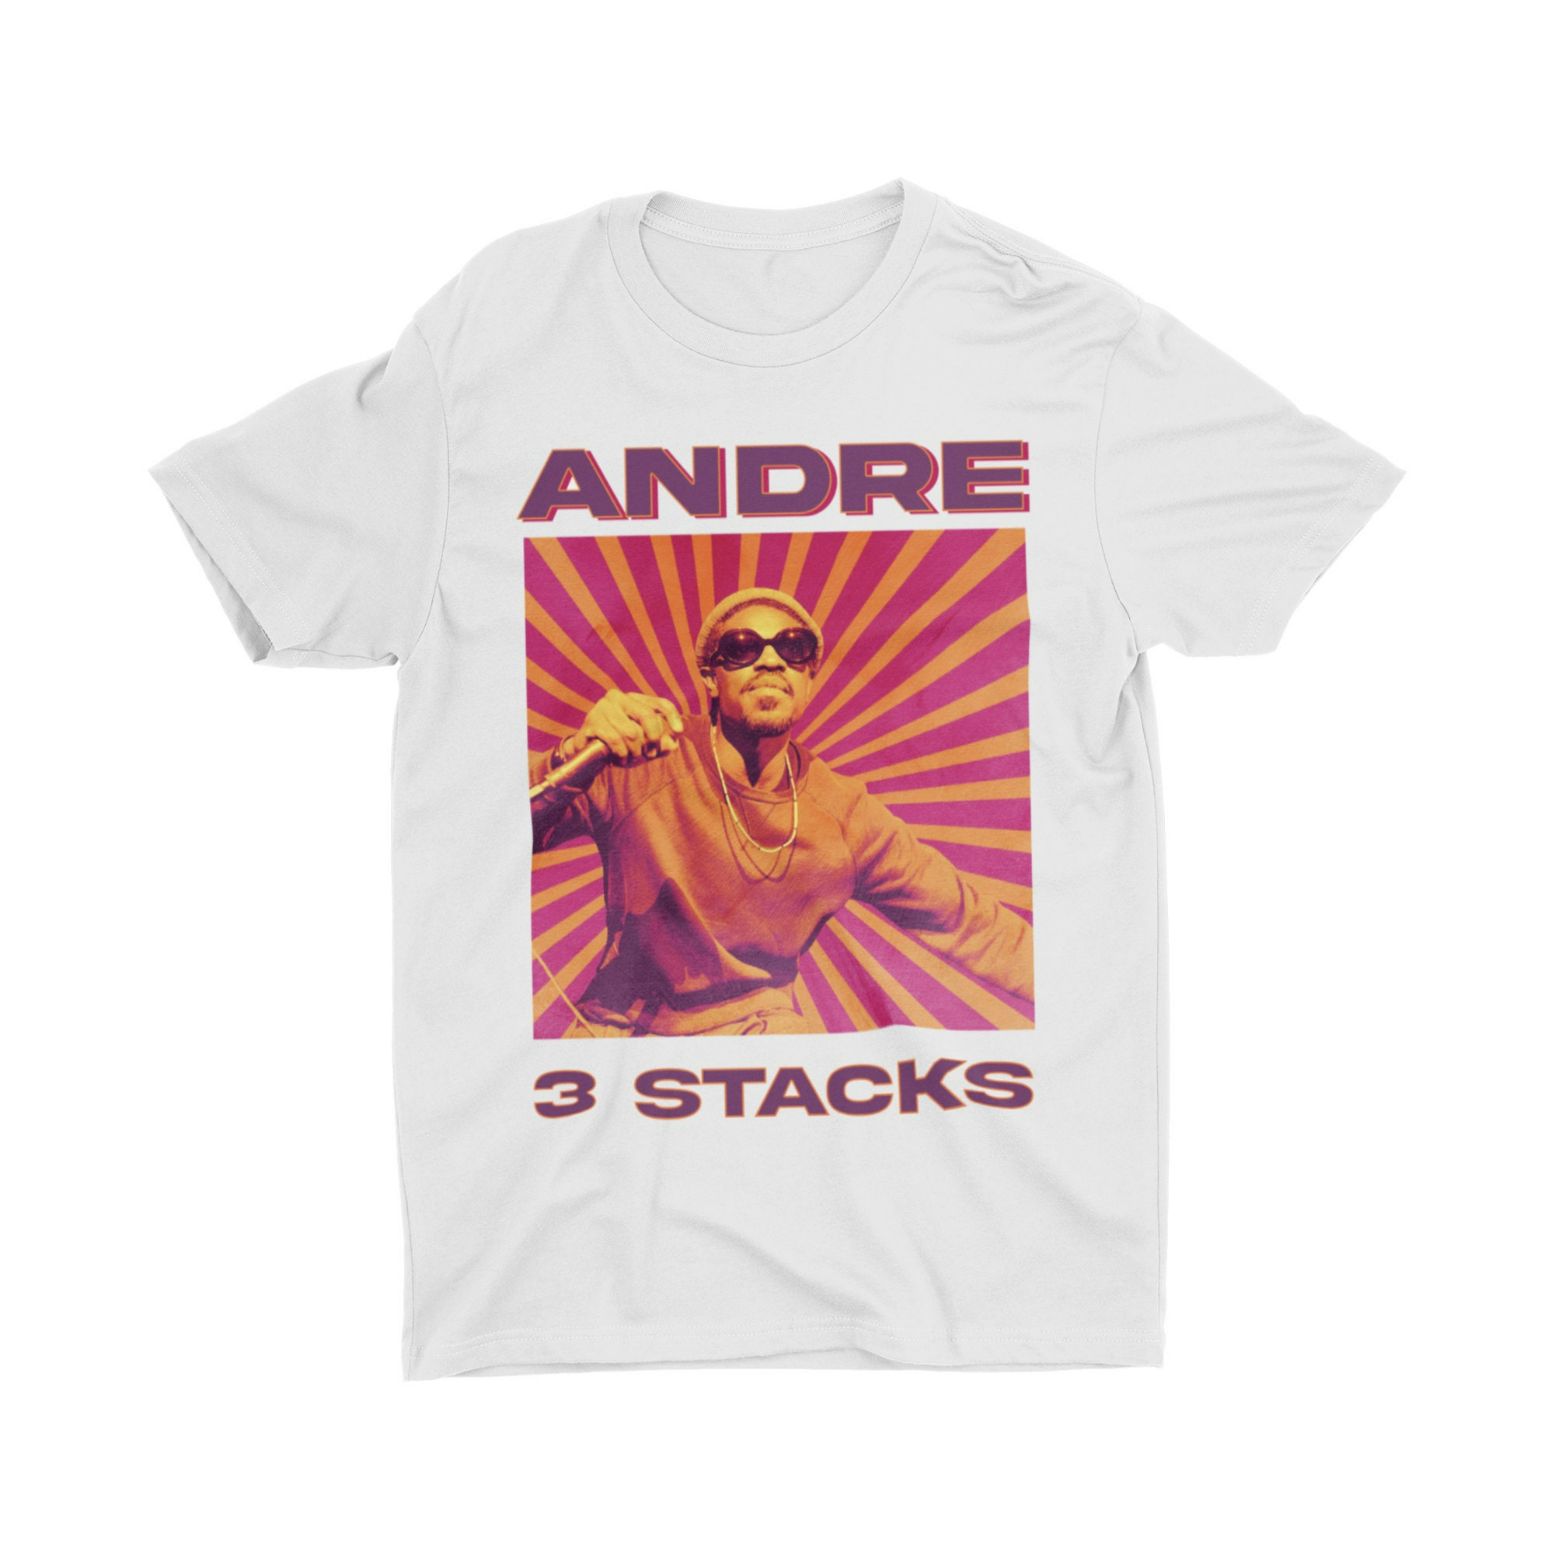 ANDRE 3000 T-SHIRT – Teepital – Everyday New Aesthetic Designs